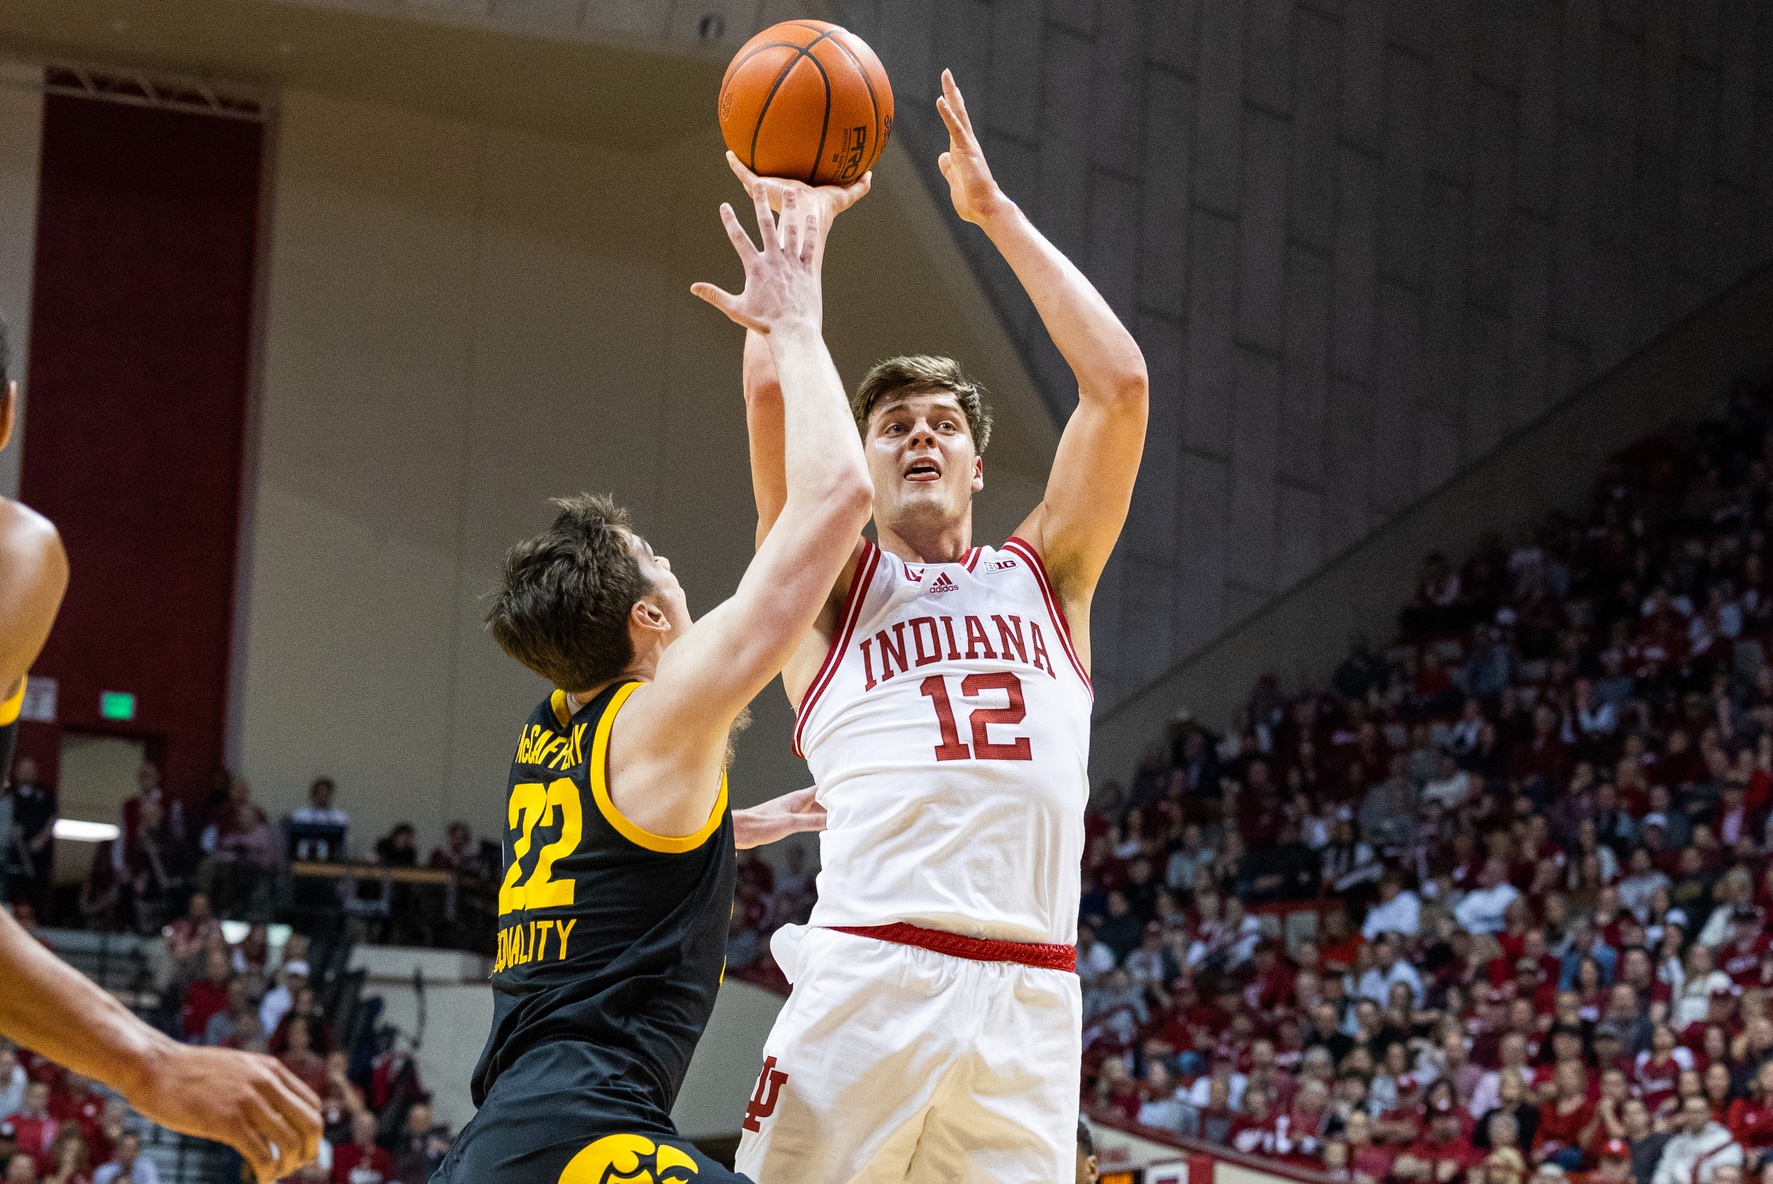 Indiana Hoosiers forward Miller Kopp (12) shoots the ball while Iowa Hawkeyes forward Patrick McCaffery (22) defends in the first half at Simon Skjodt Assembly Hall.